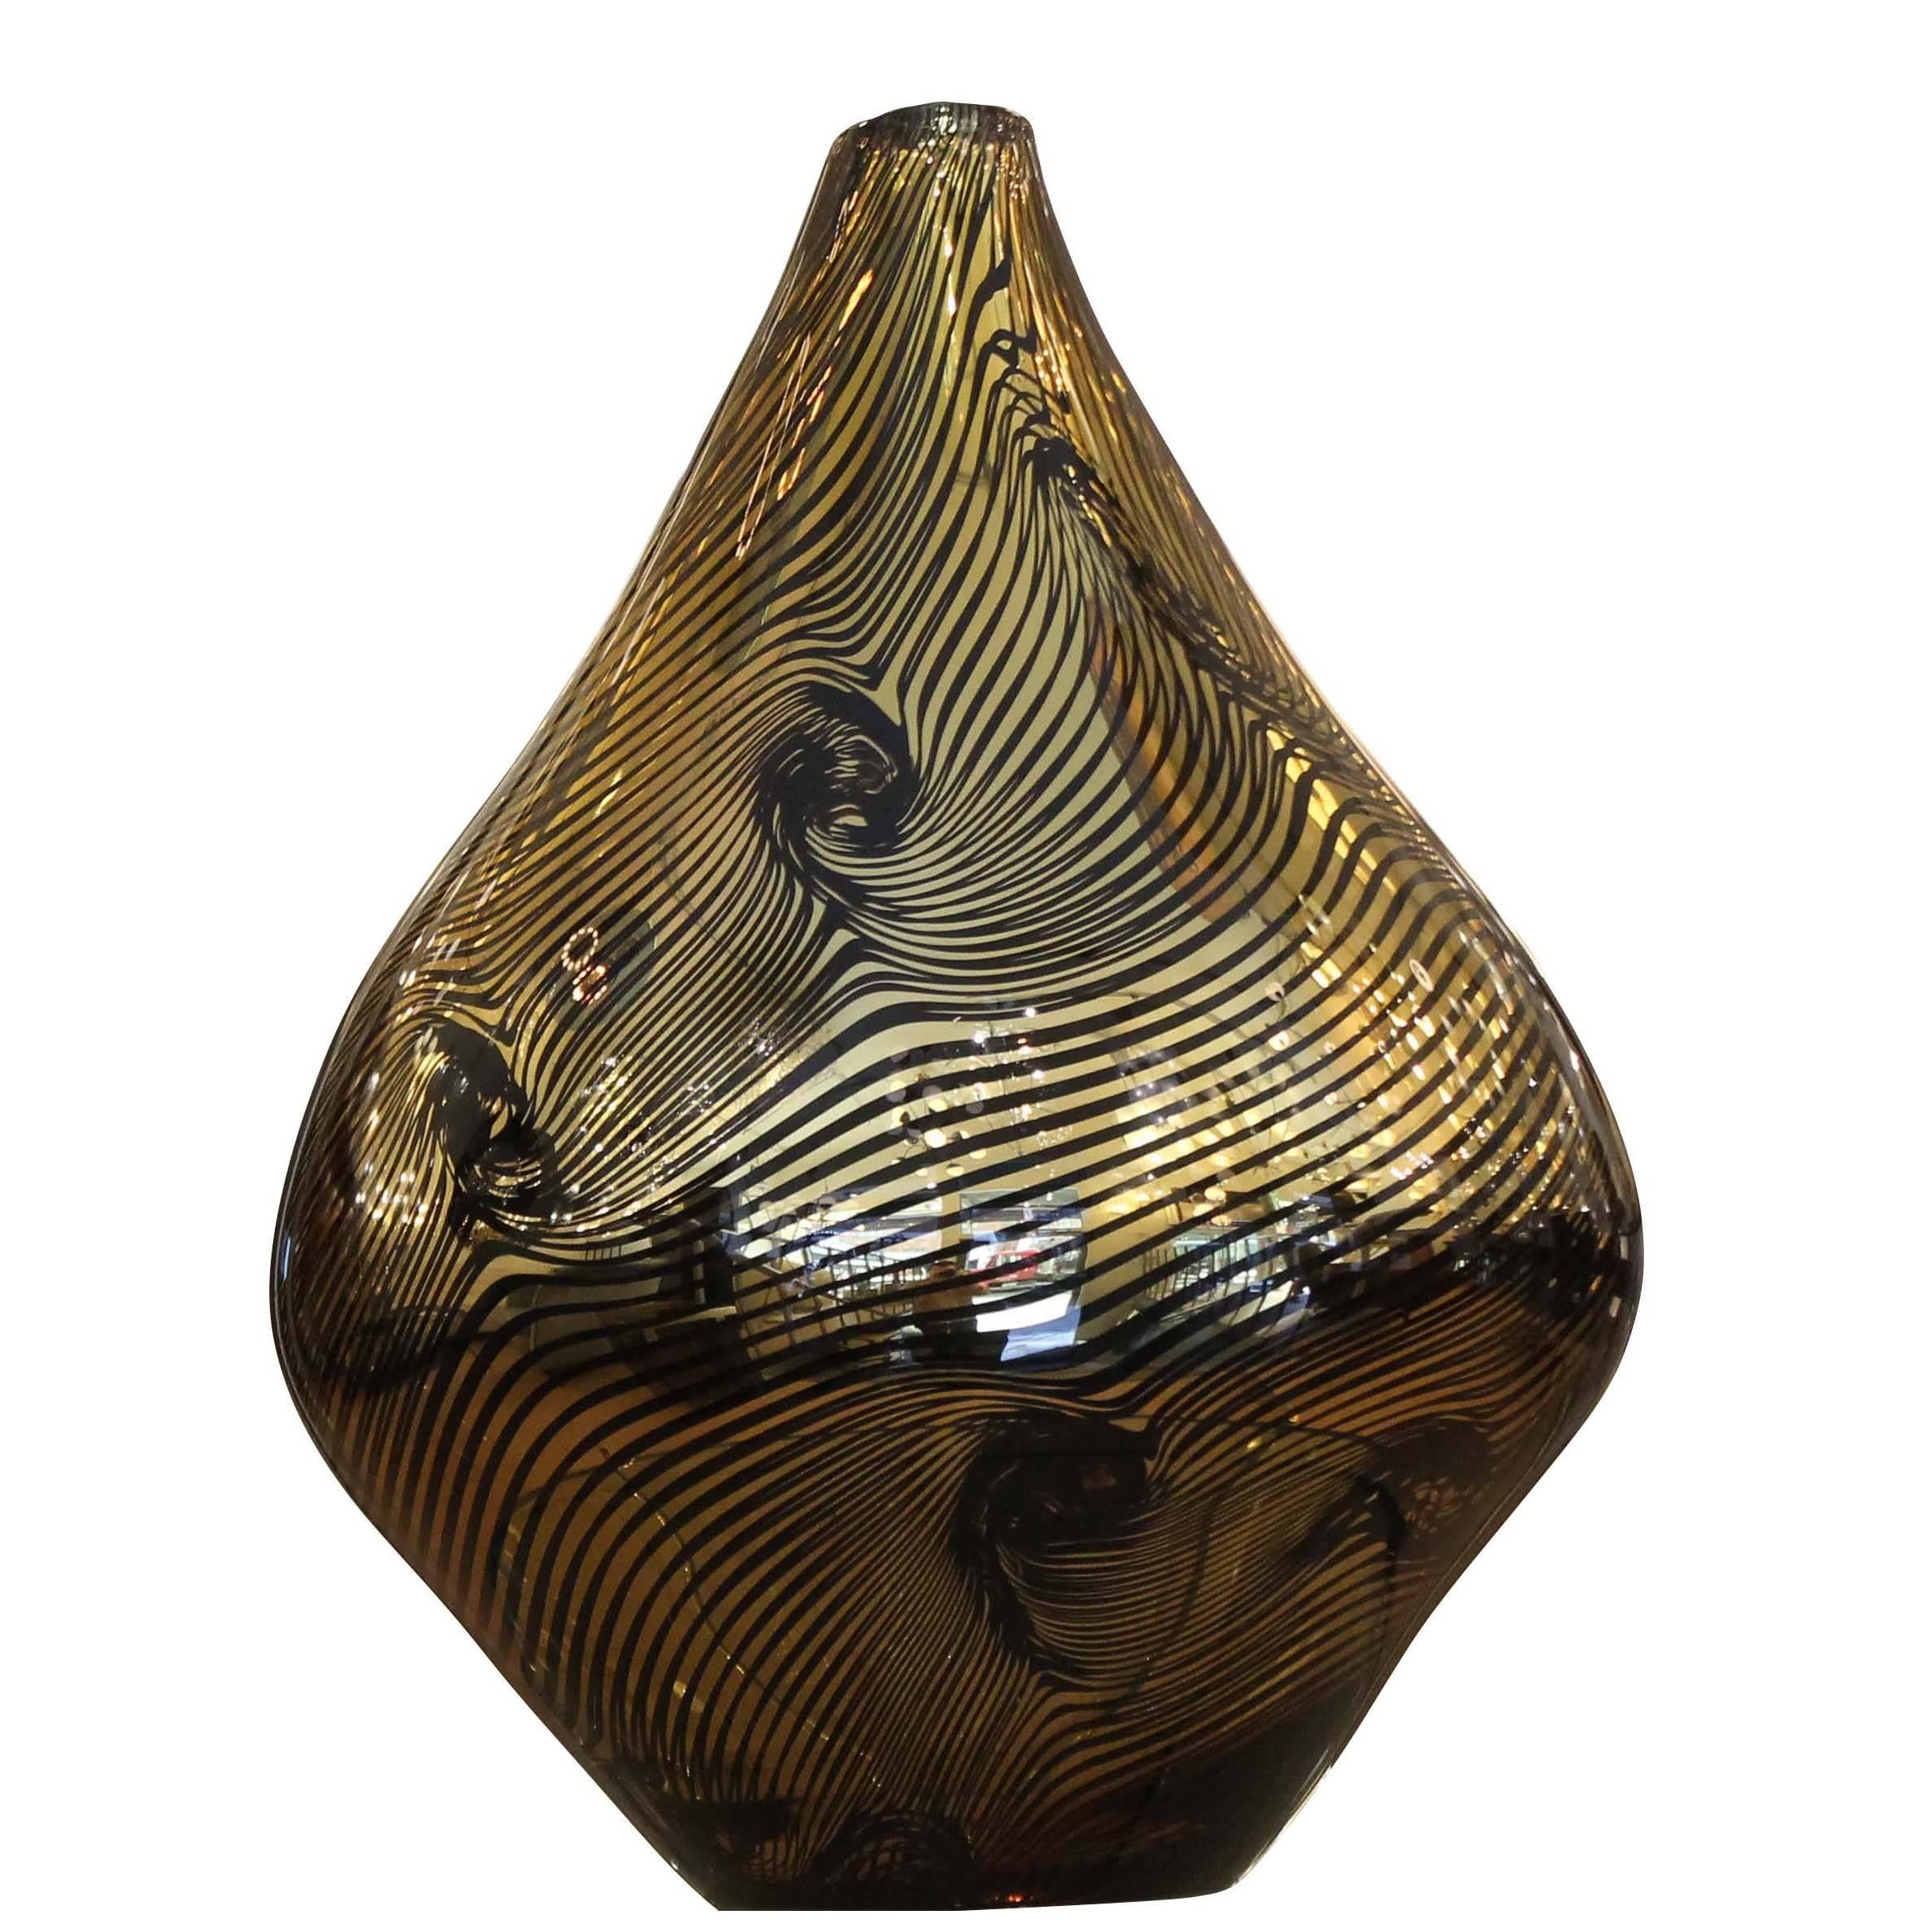 Set of three golden Murano vases with irregular black lines. Made by glass blower Davide Dona'. Diameters vary from 9